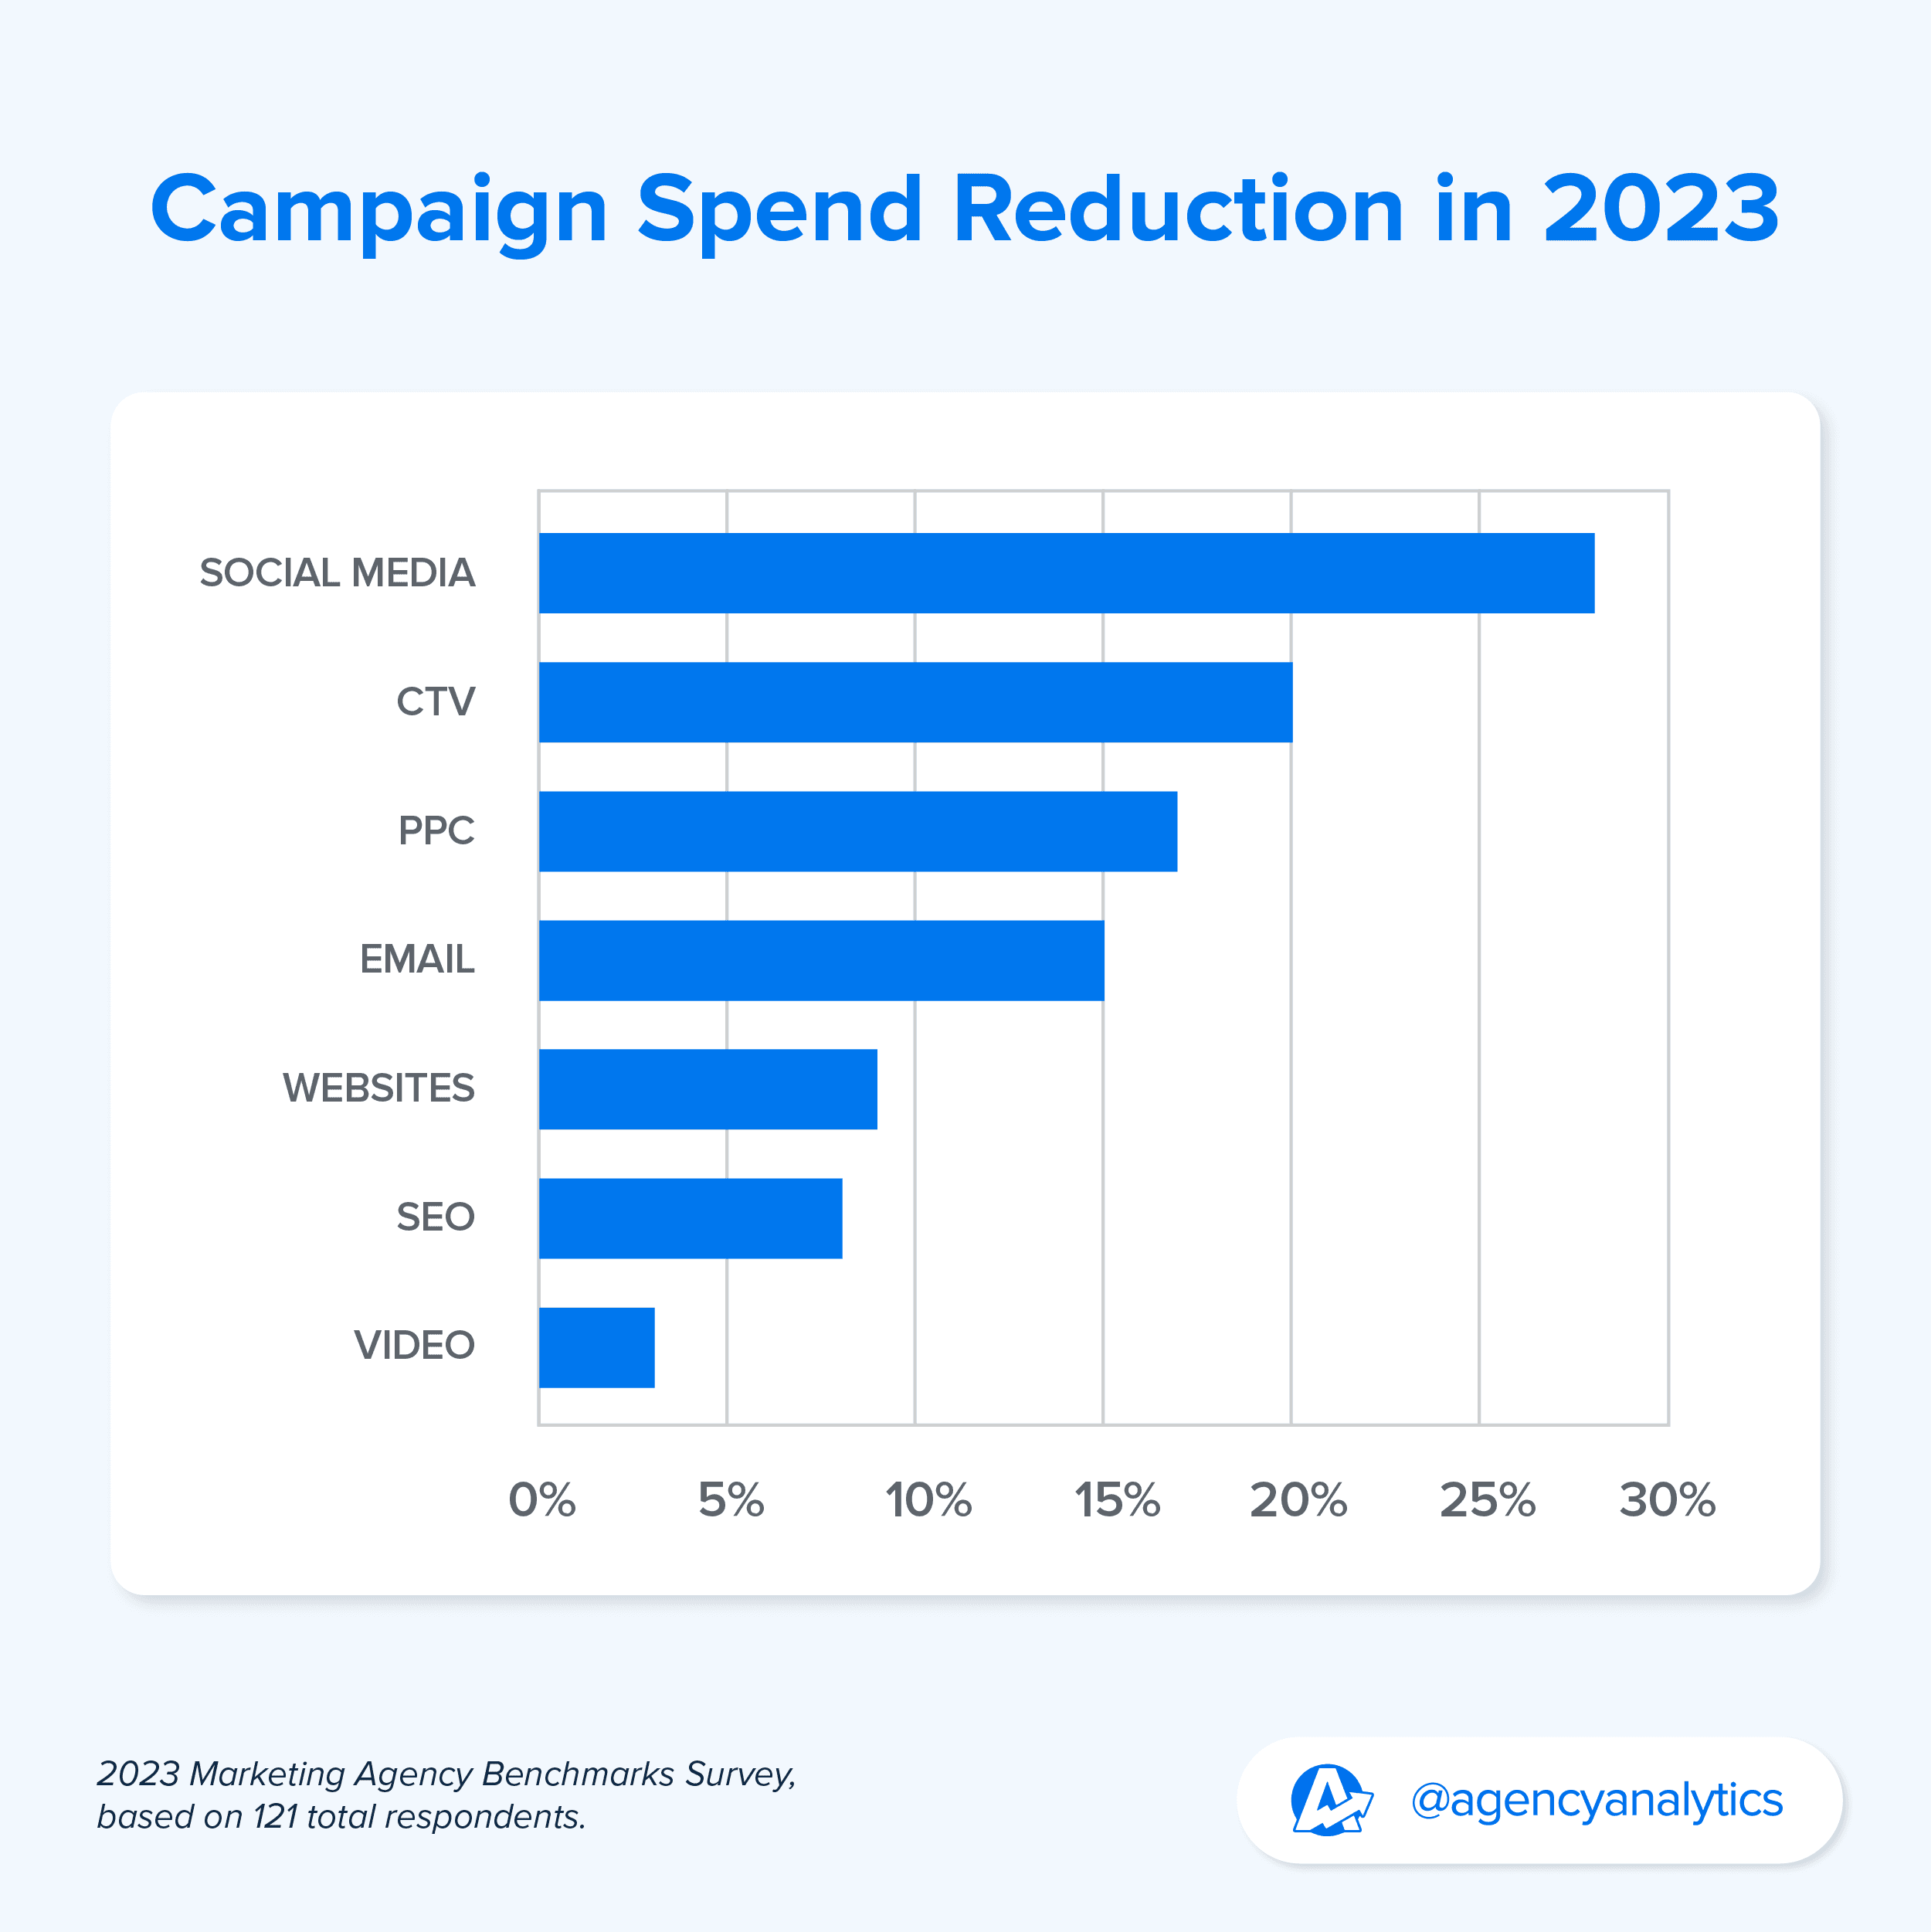 Graph showing Channel Spend Reductions Planned in 2023